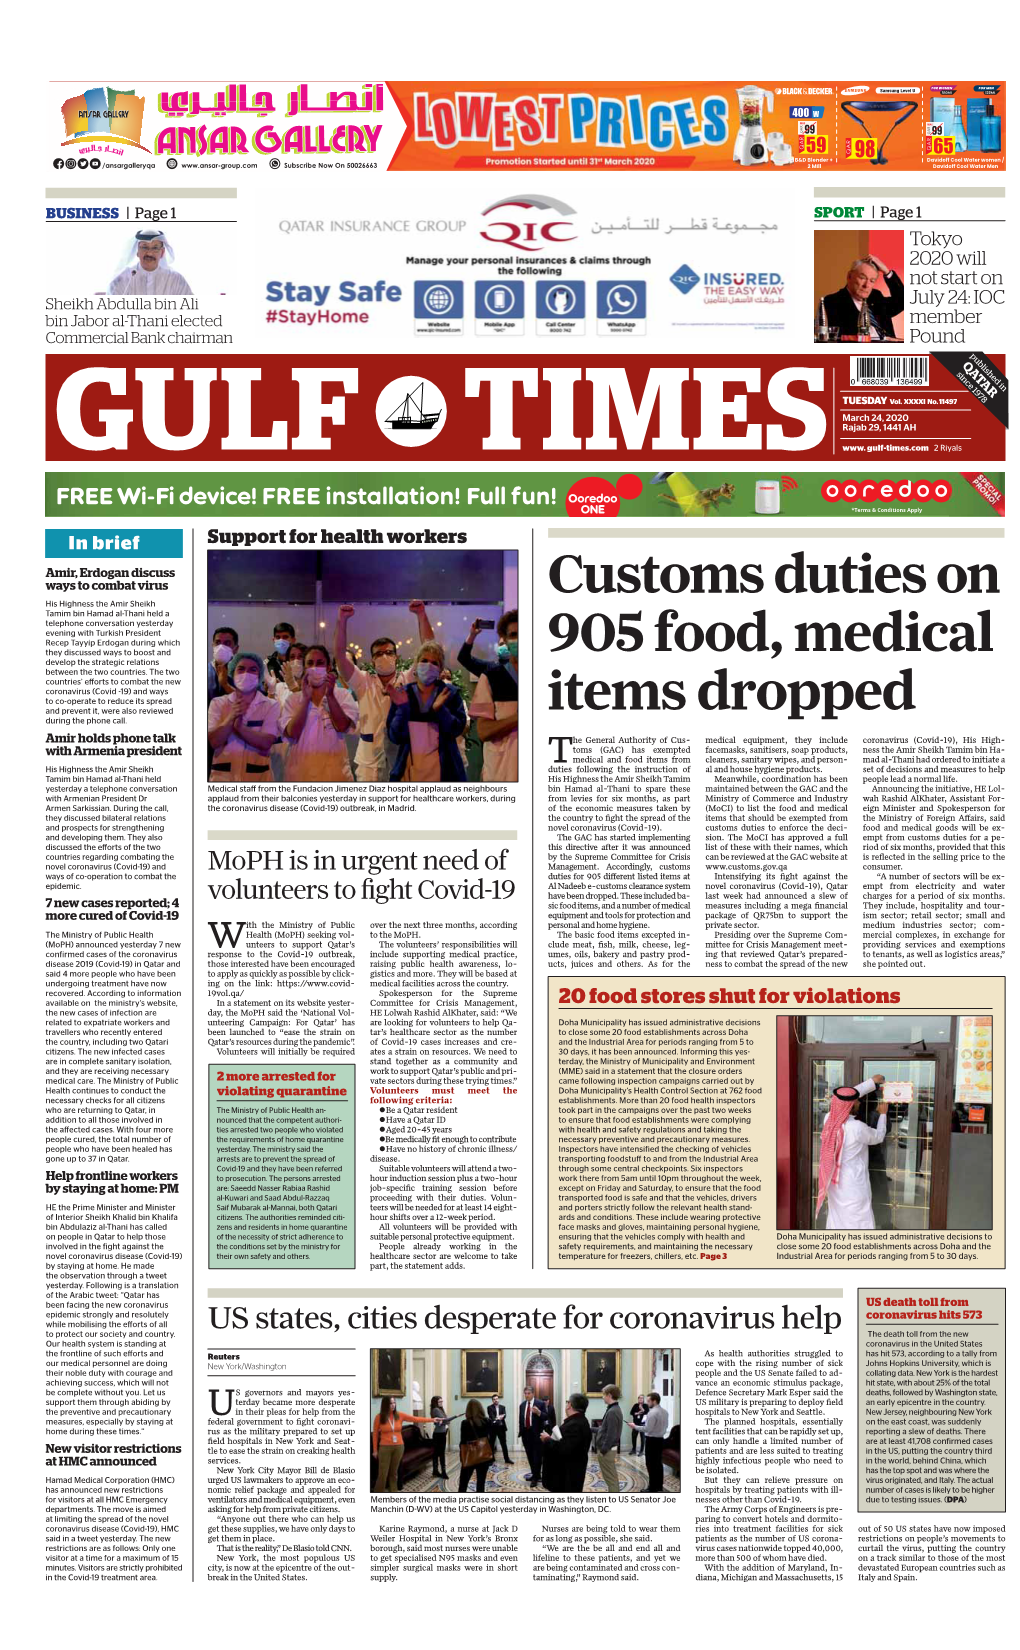 Customs Duties on 905 Food, Medical Items Dropped